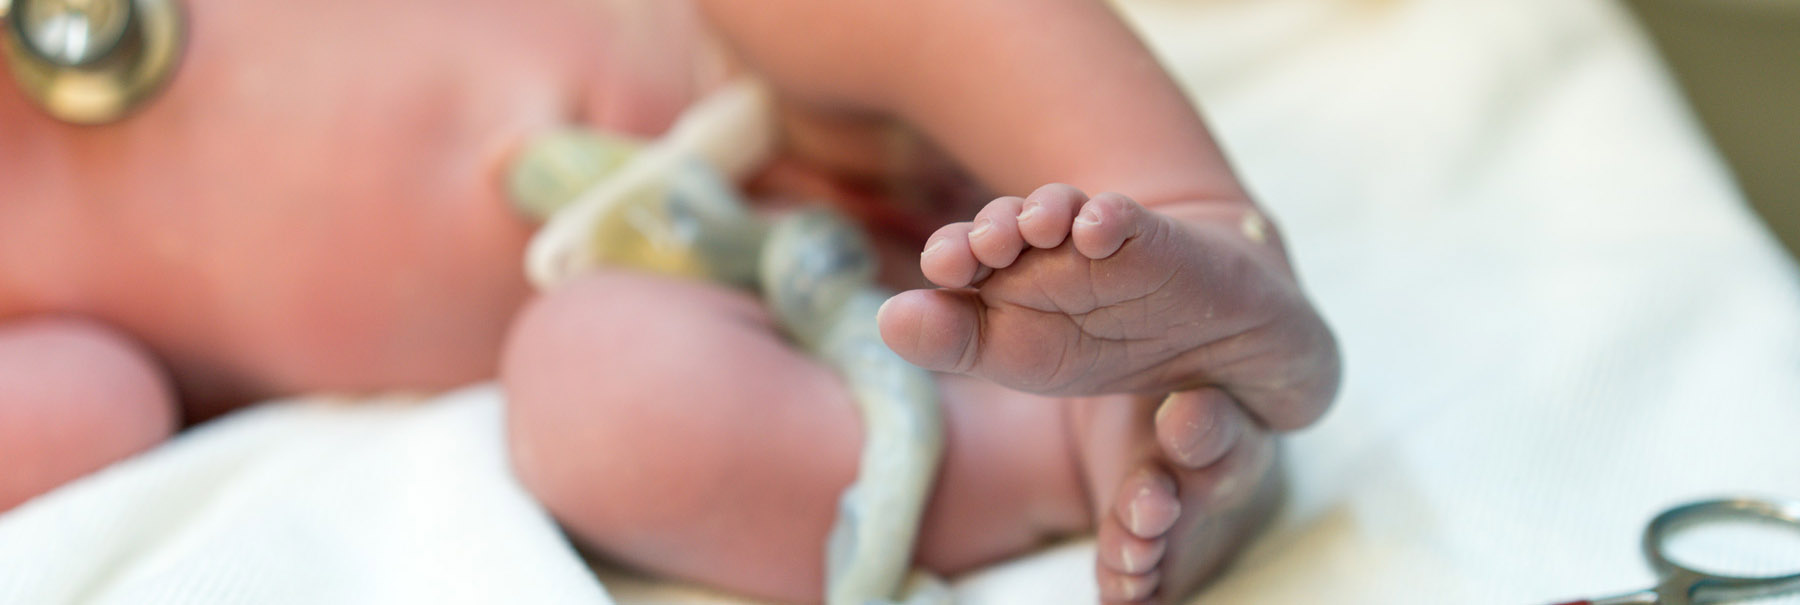 Close up of a newborn baby's feet and umbilical cord